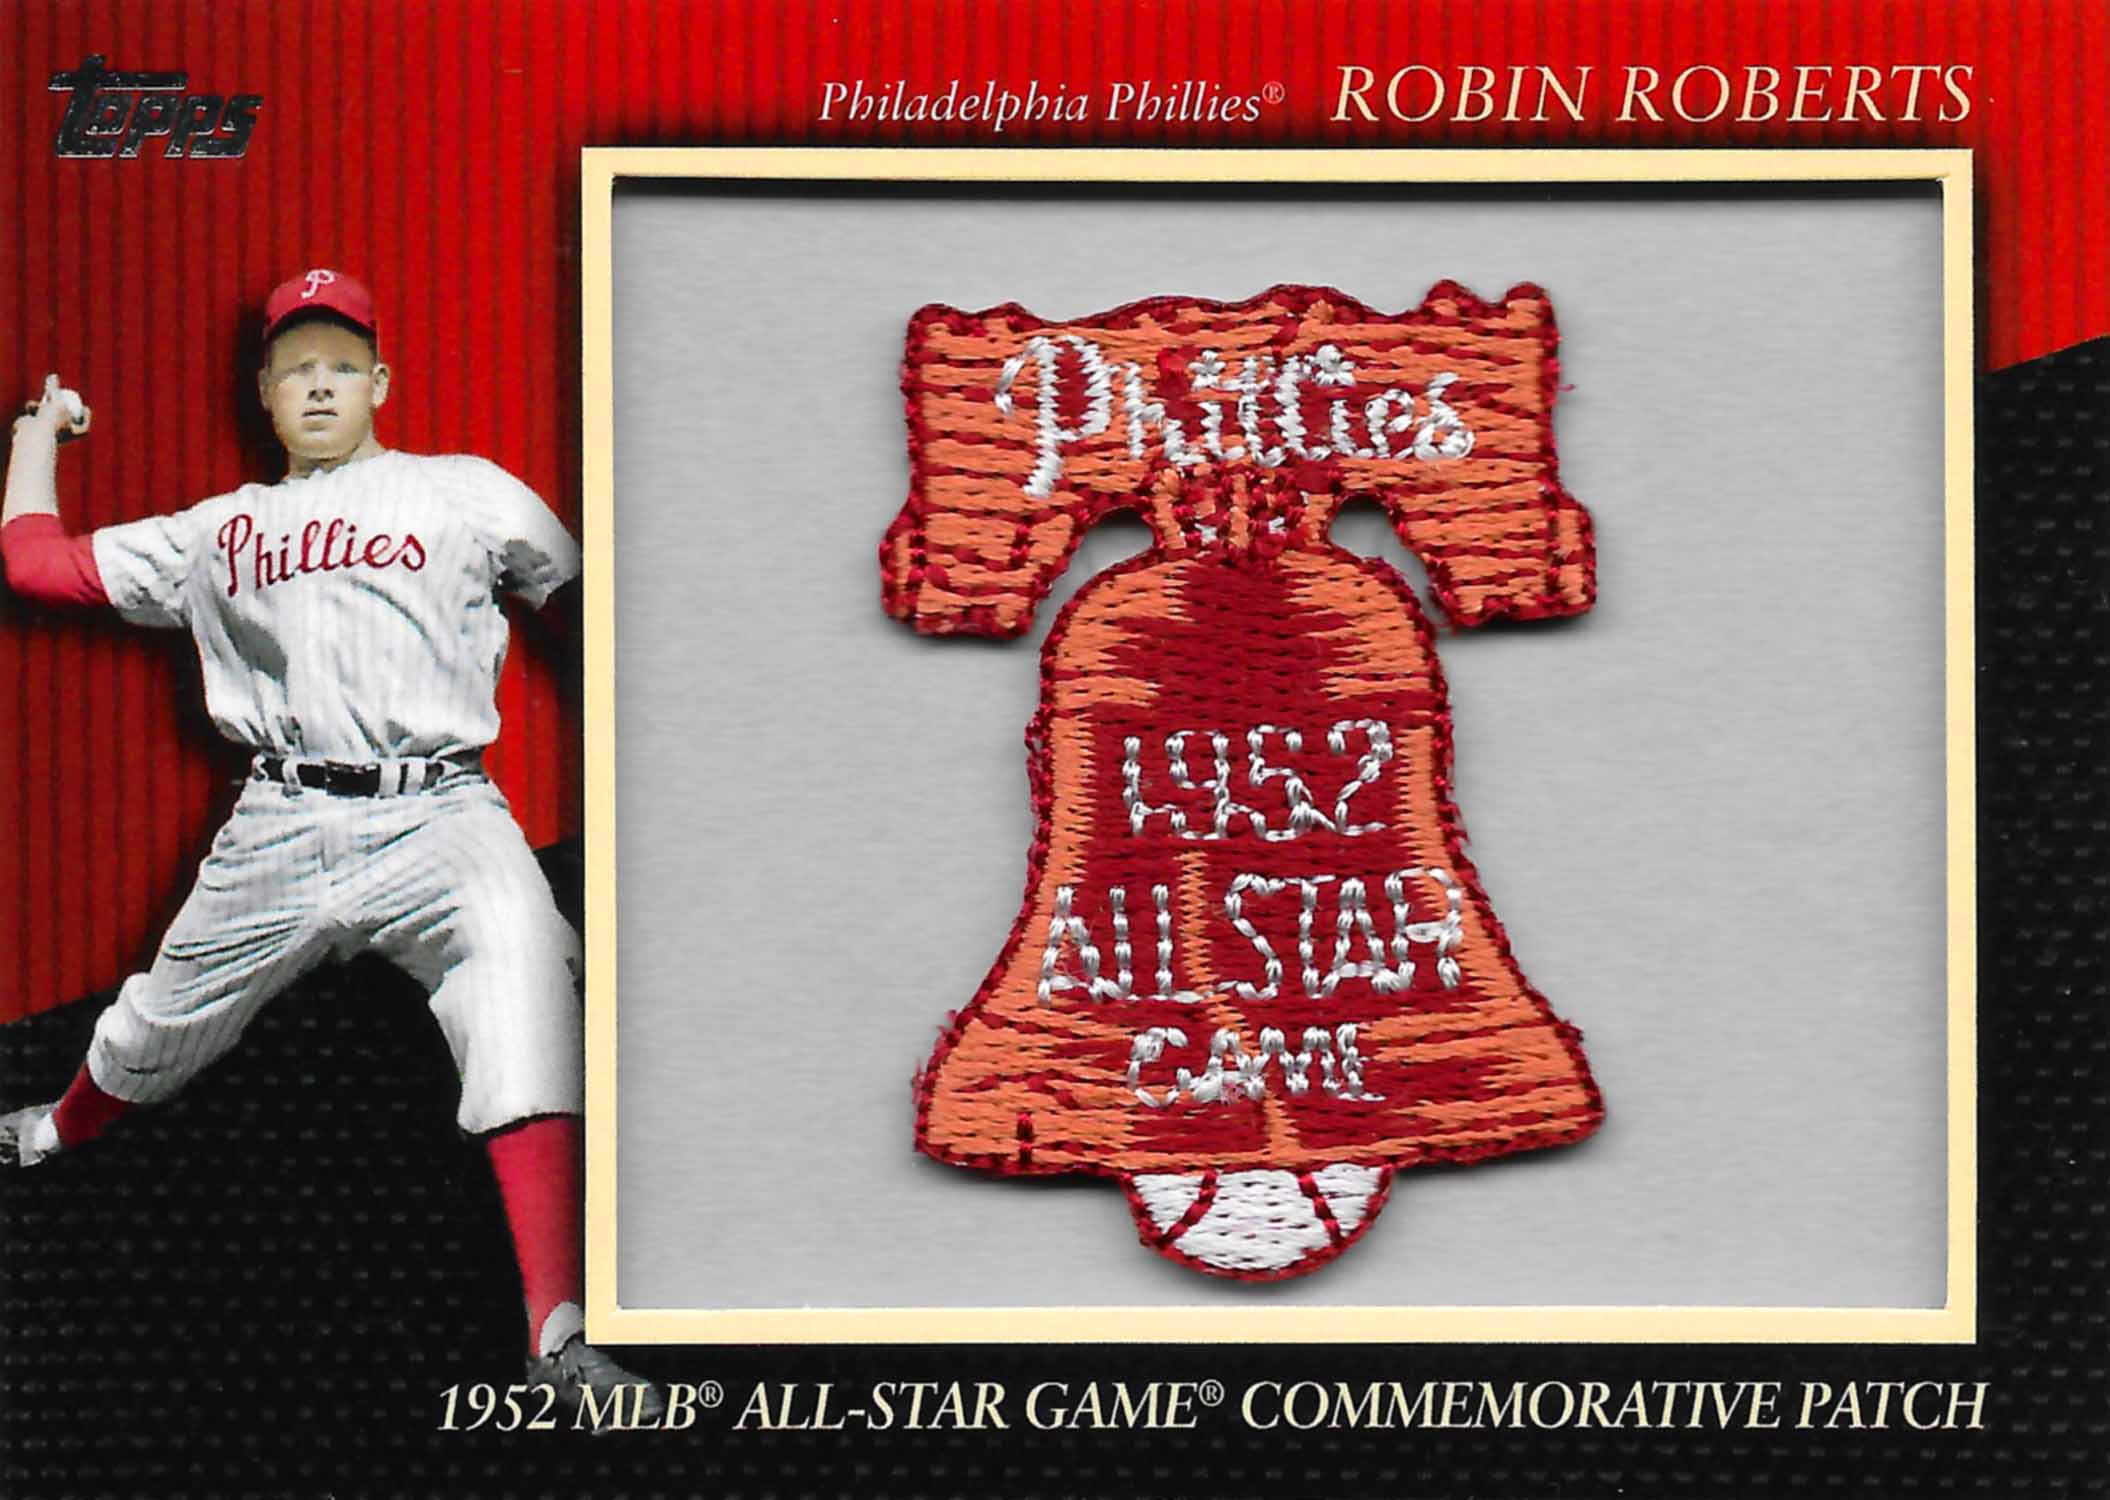 2010 Topps Commemorative Patch